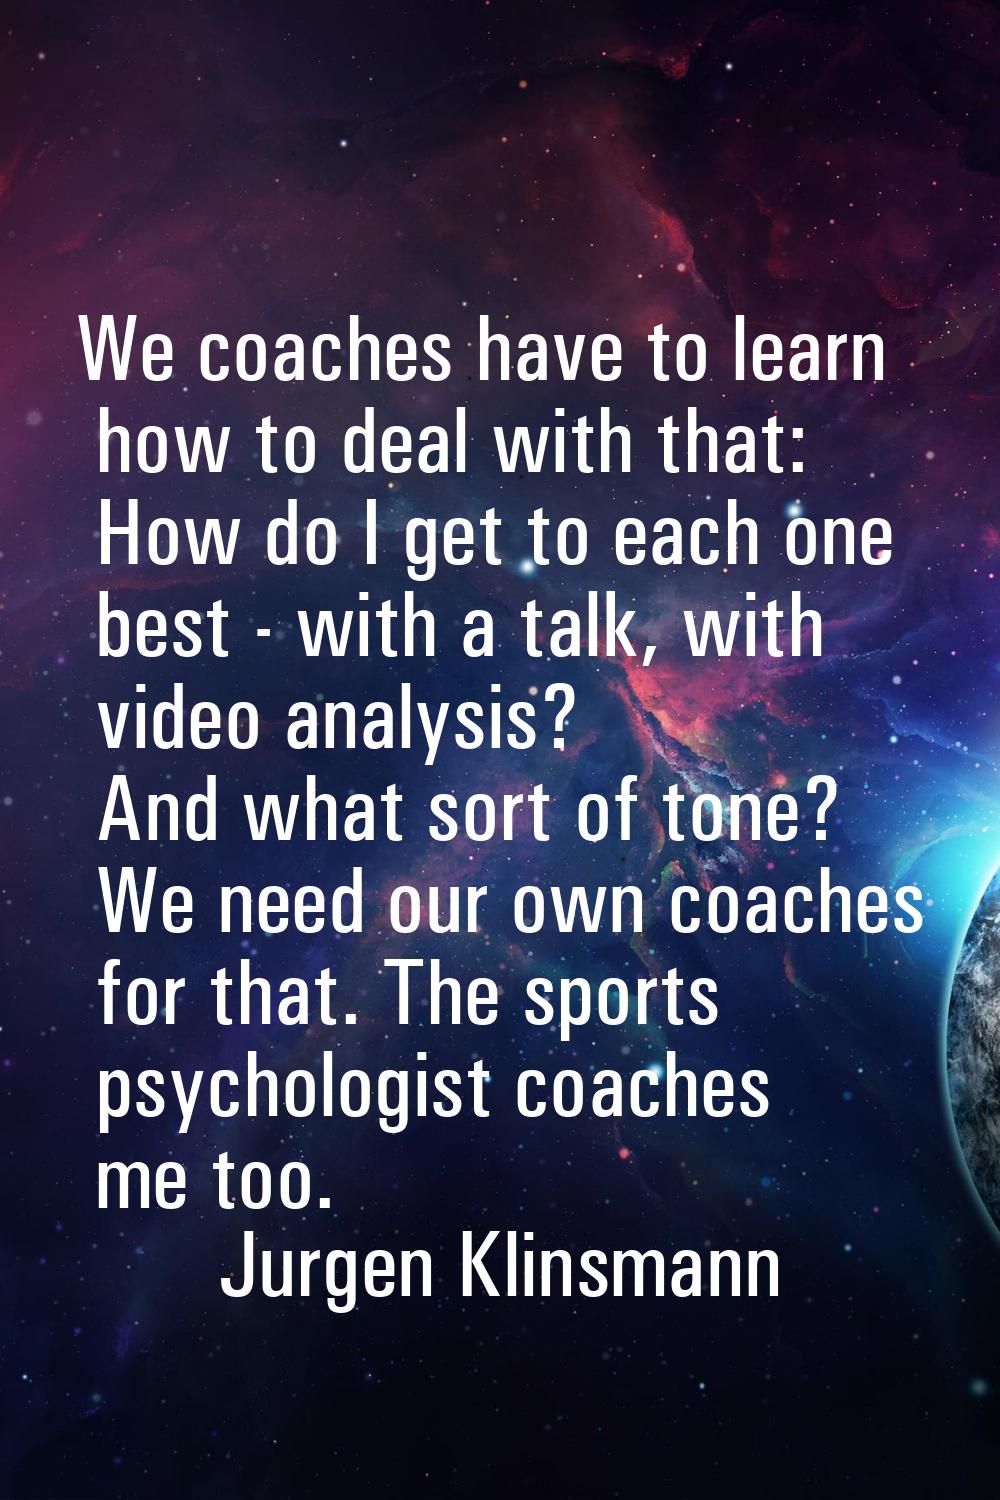 We coaches have to learn how to deal with that: How do I get to each one best - with a talk, with v